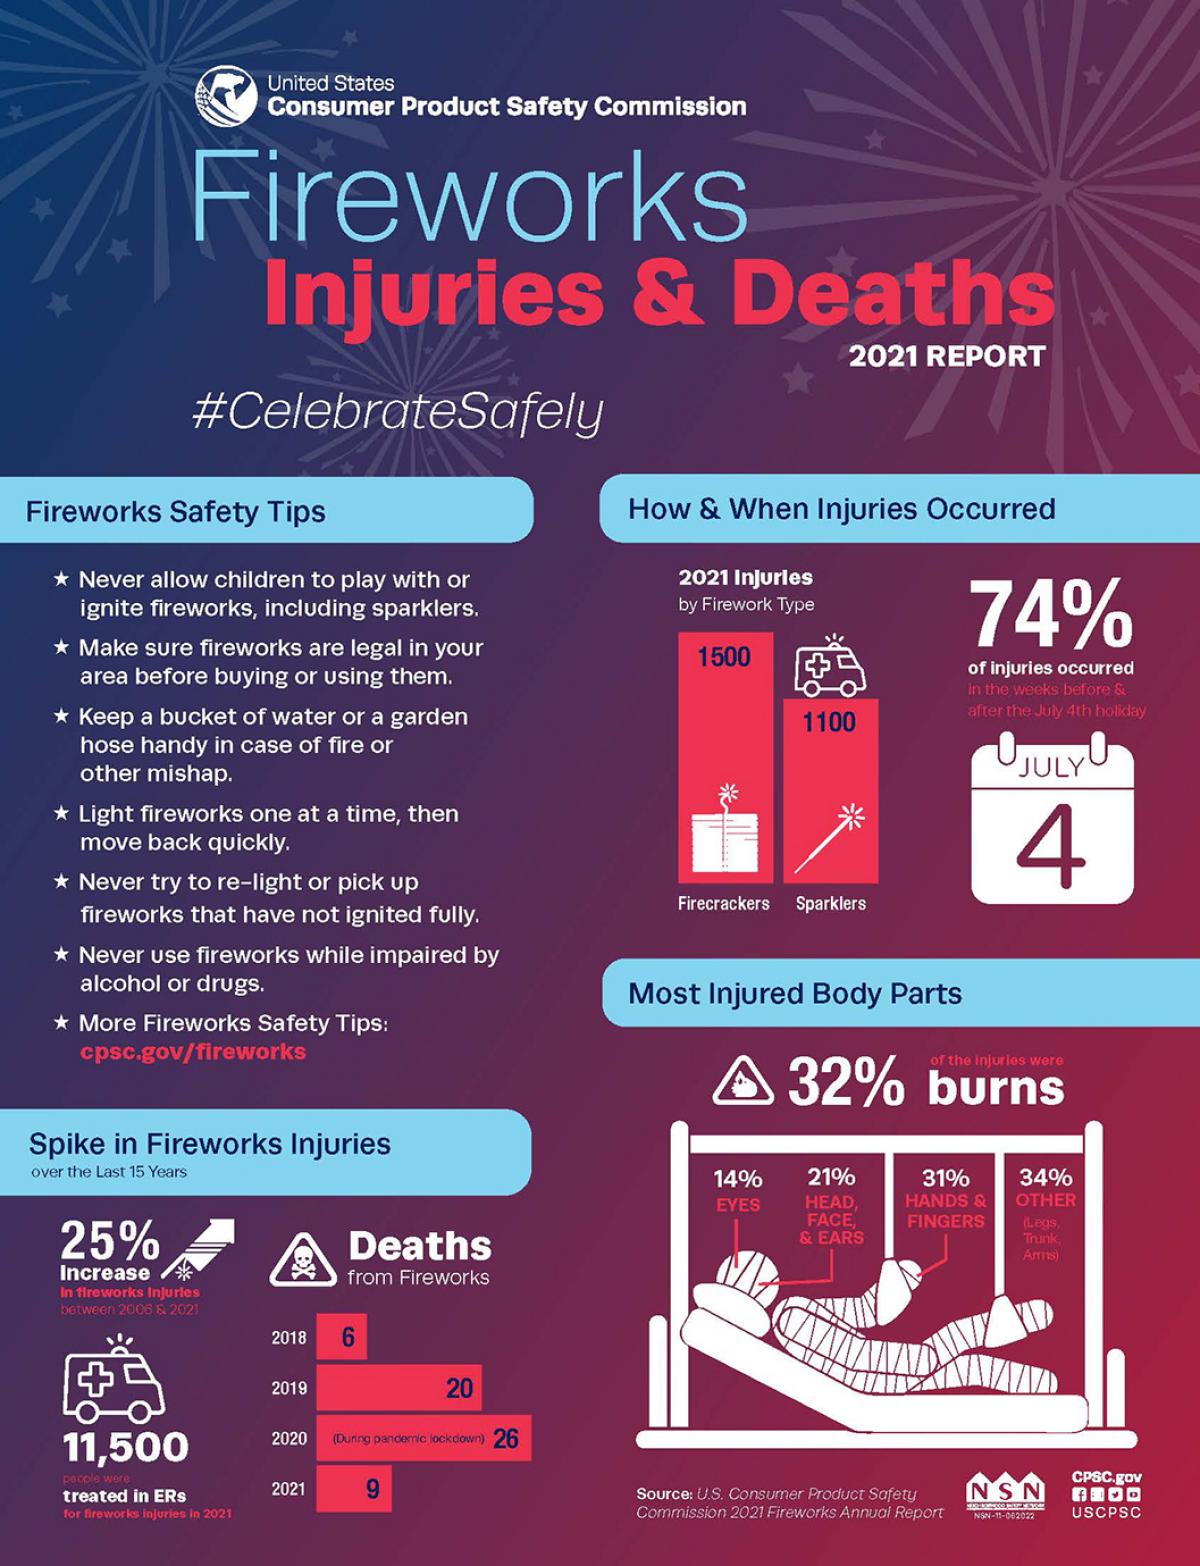 Fireworks Injuries Infographic from the Consumer Product Safety Commission